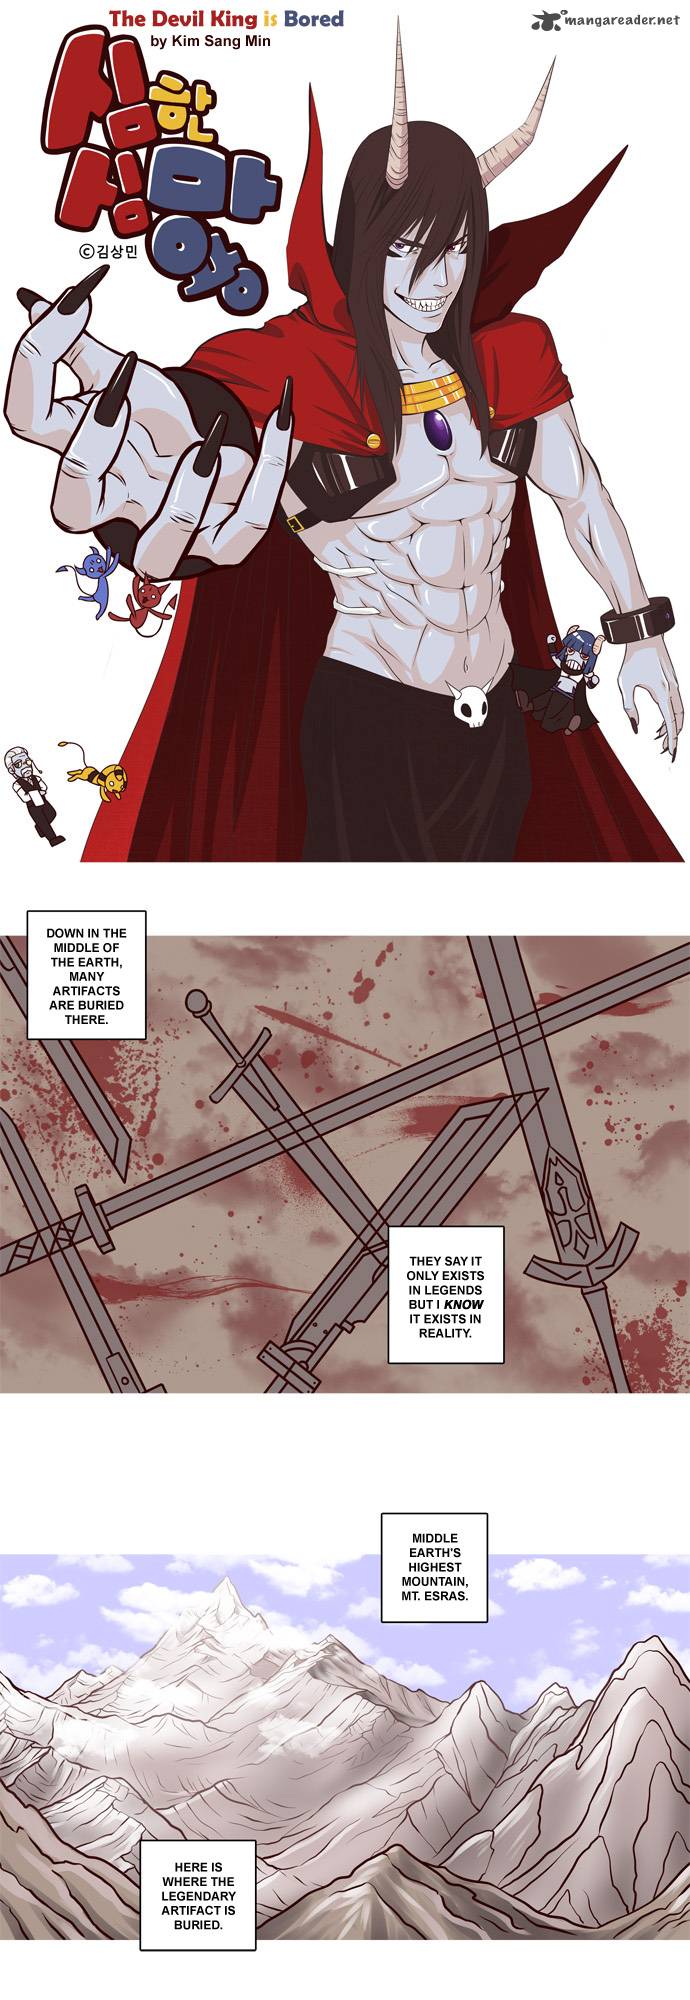 The Devil King Is Bored Chapter 6 Page 1